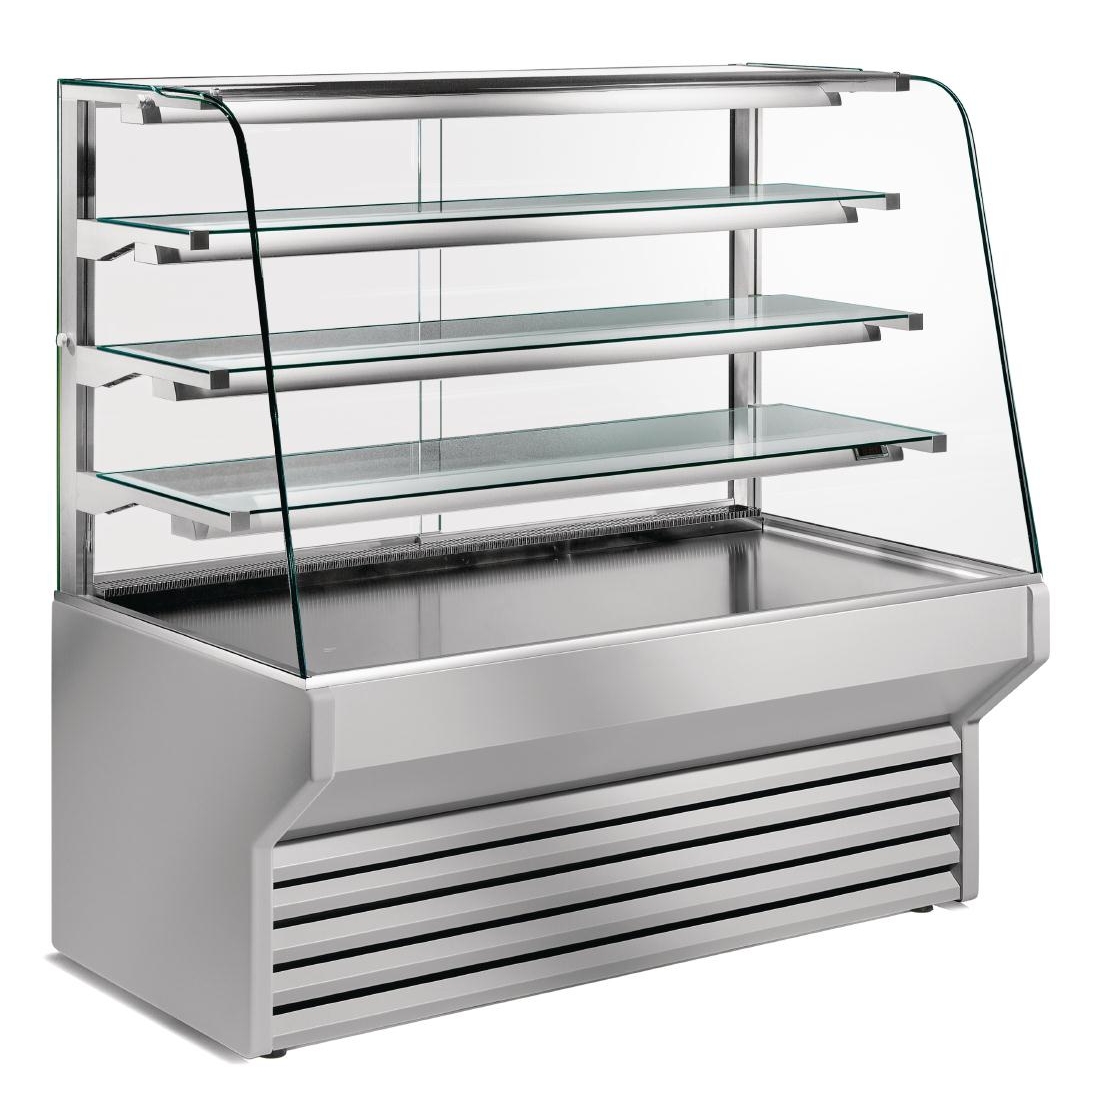 Zoin Harmony Ambient Serve Over Counter 940mm ES094NNN